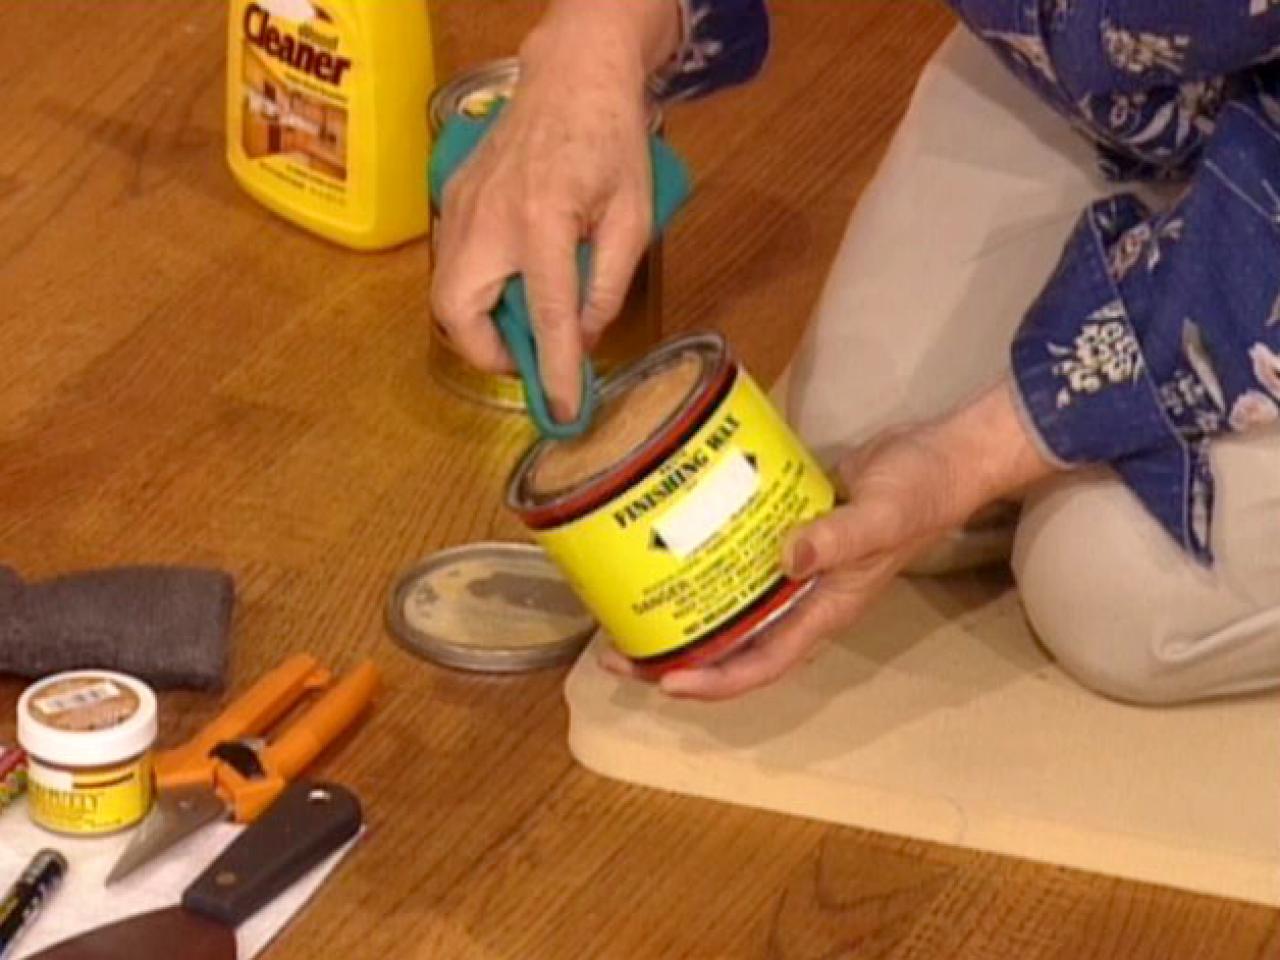 How To Touch Up Wood Floors Tos Diy, How To Repair Damaged Hardwood Floor Finish